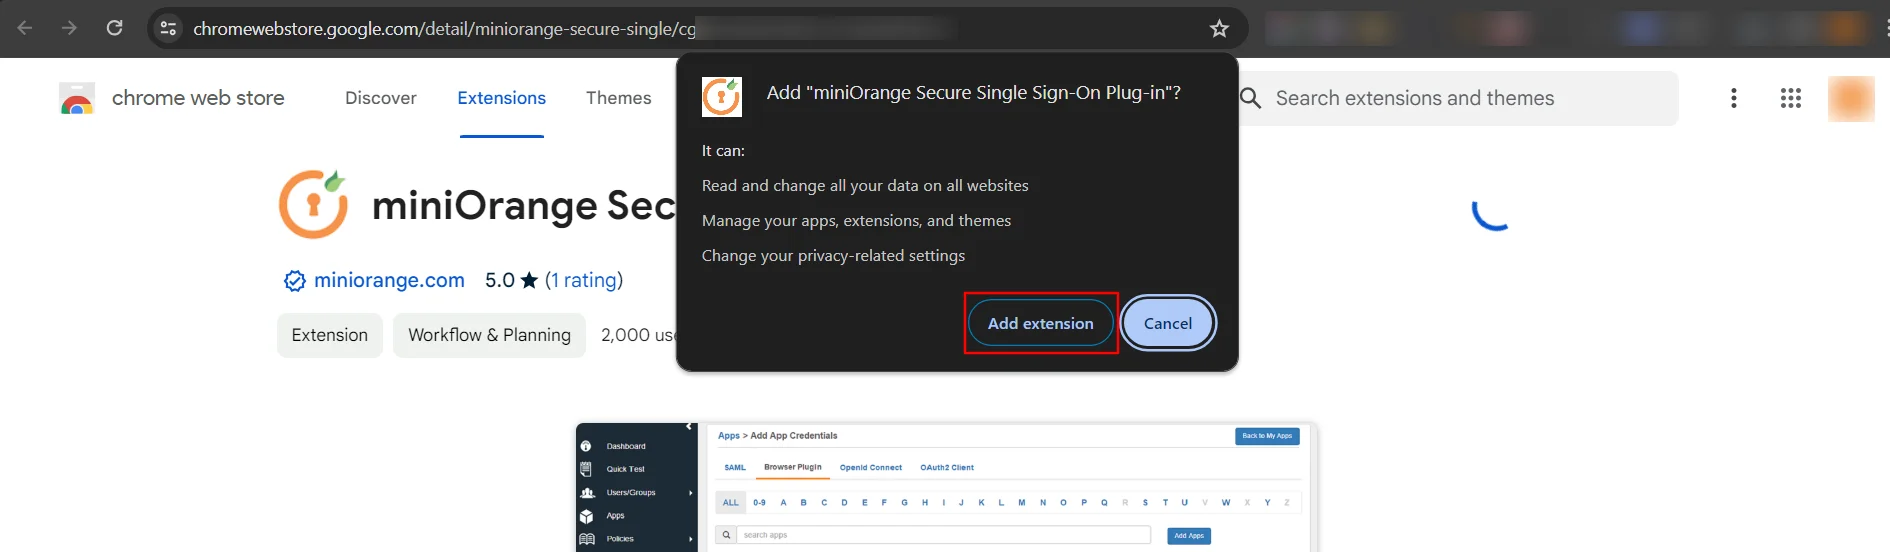 Groupon  Single Sign-On (sso) extension added in chrome